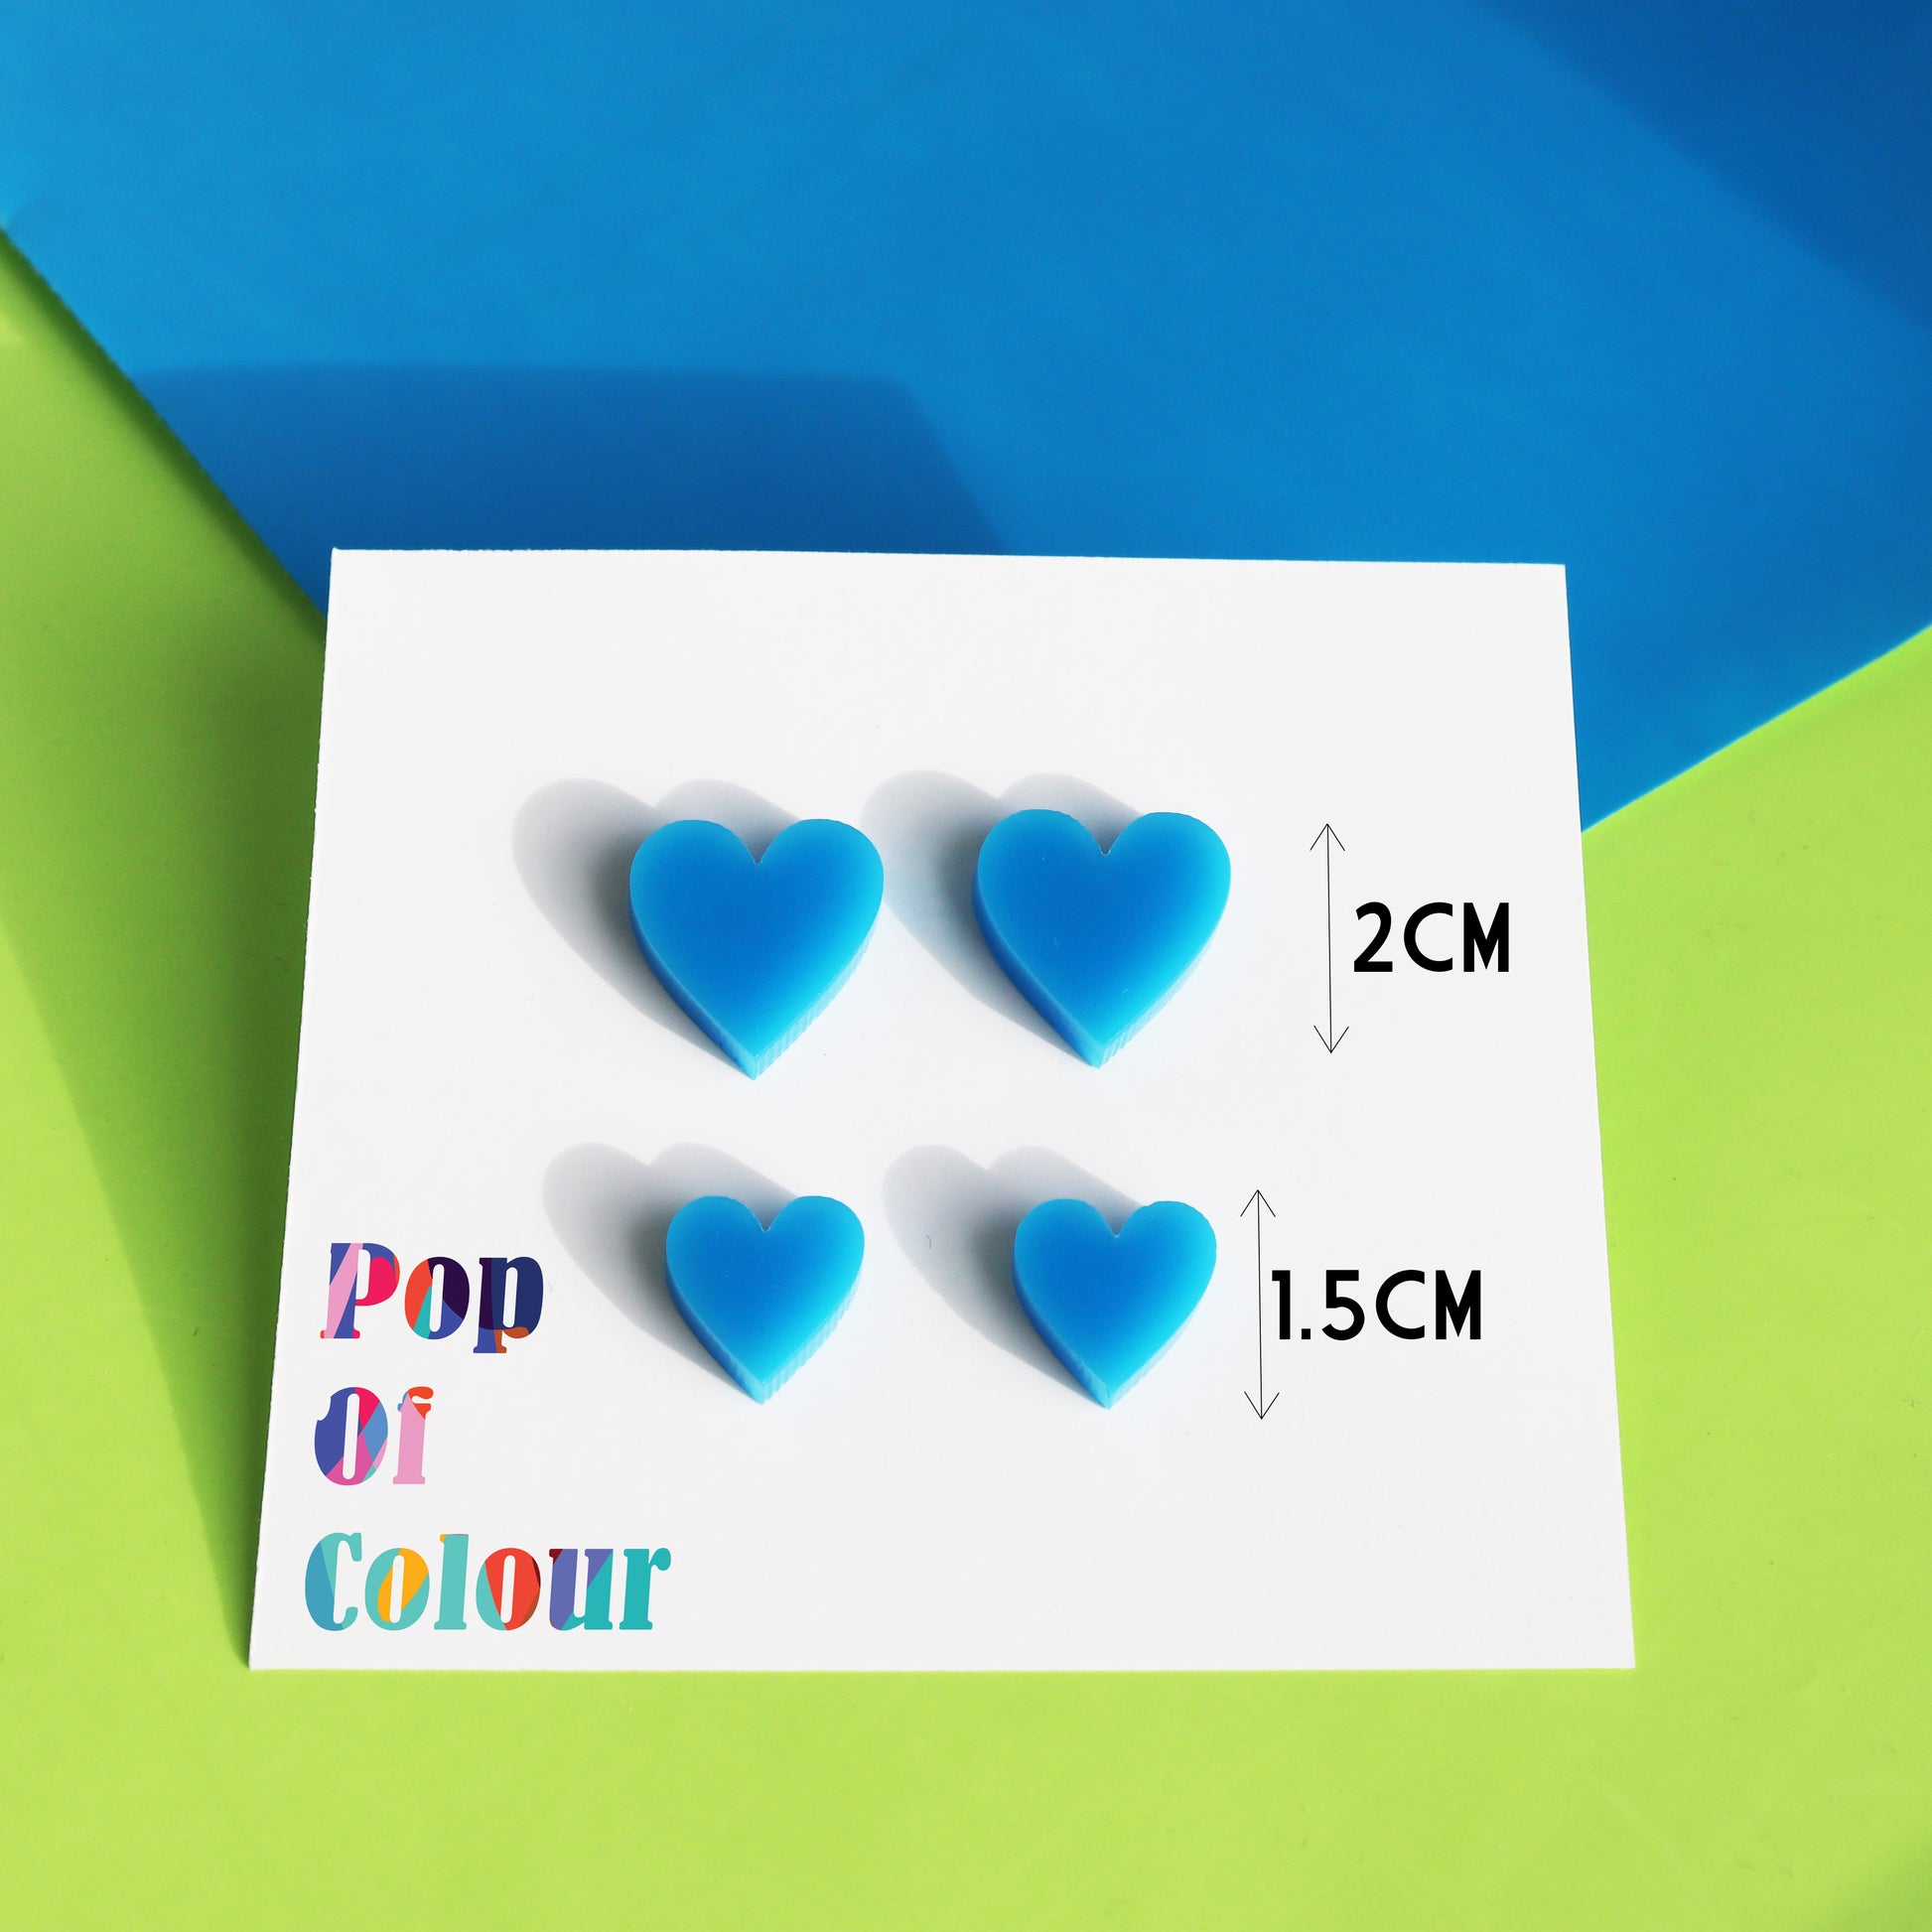 acrylic blue stud heart earrings available in two sizes shown on white earring backing card with Pop of Colour Logo in sunlight with sizes